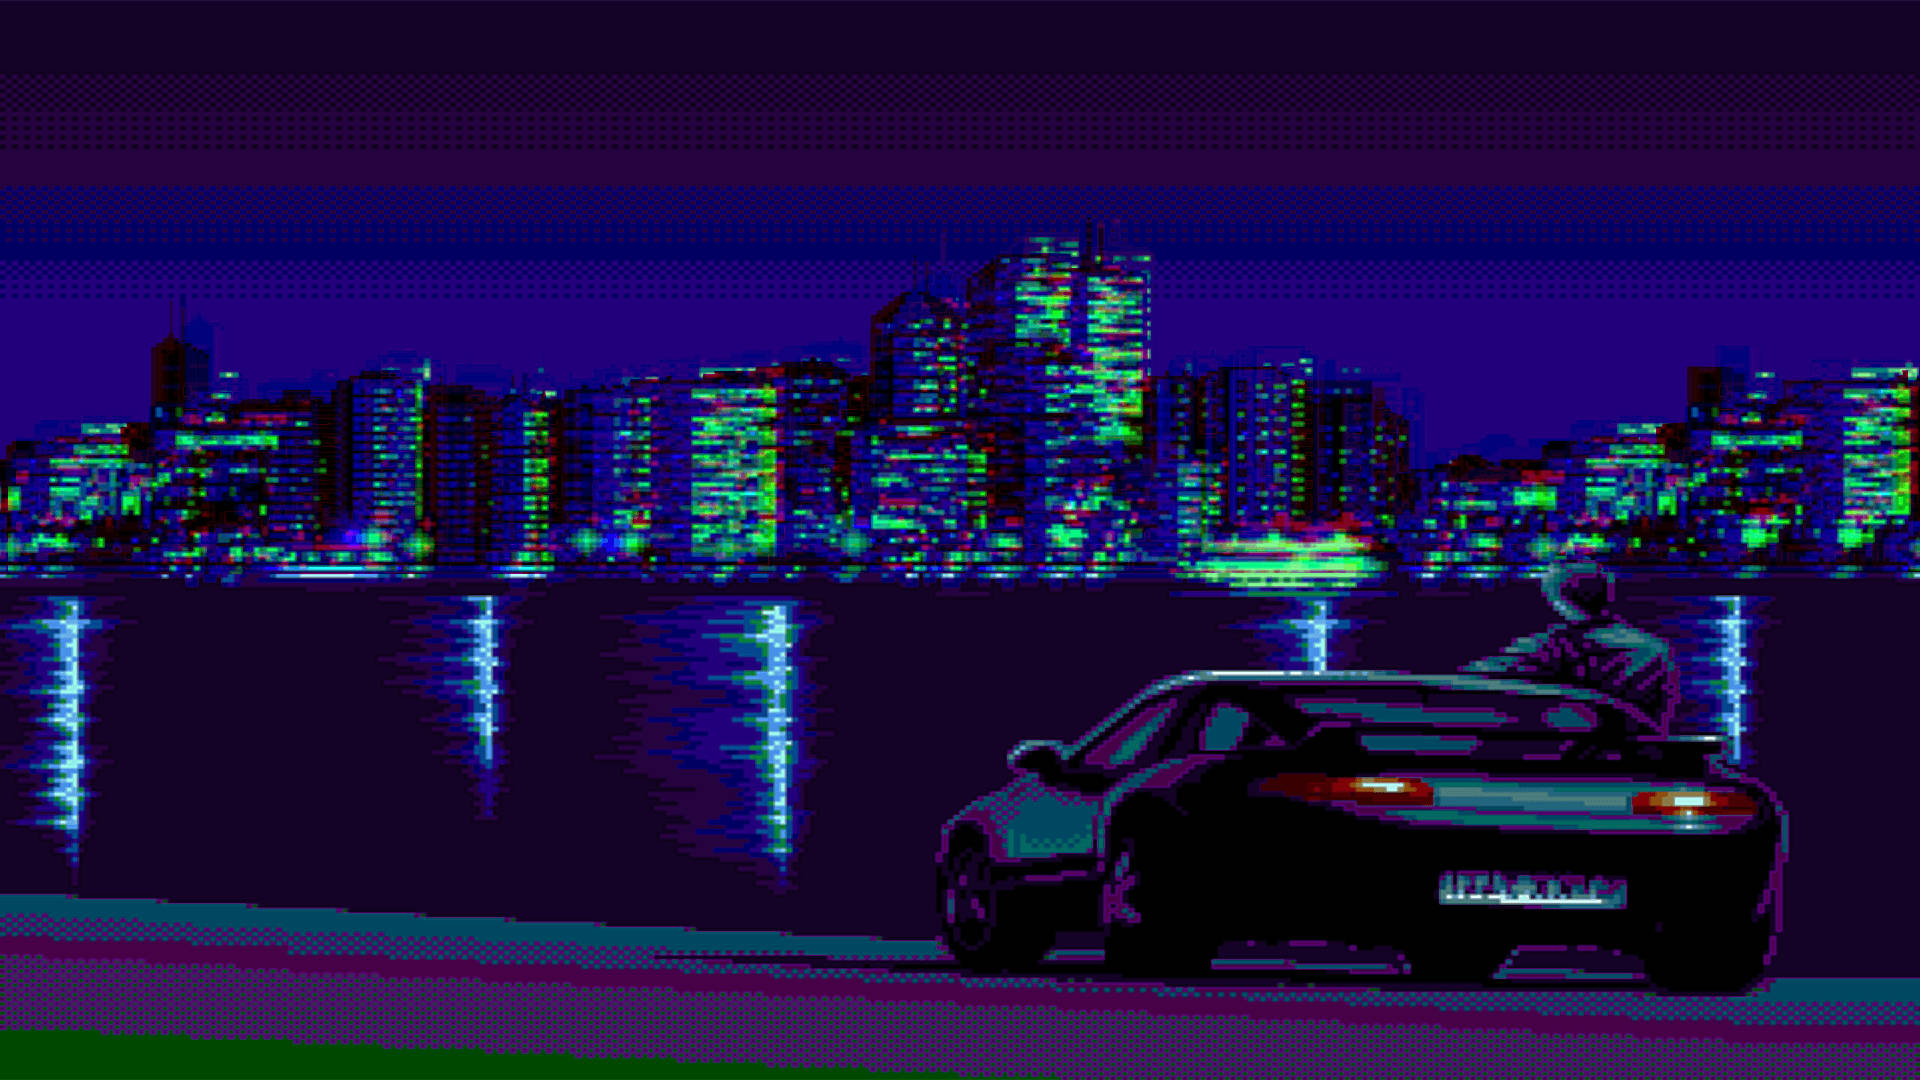 Get Lost In The Bright Pixels Of A City Under Nightfall Wallpaper